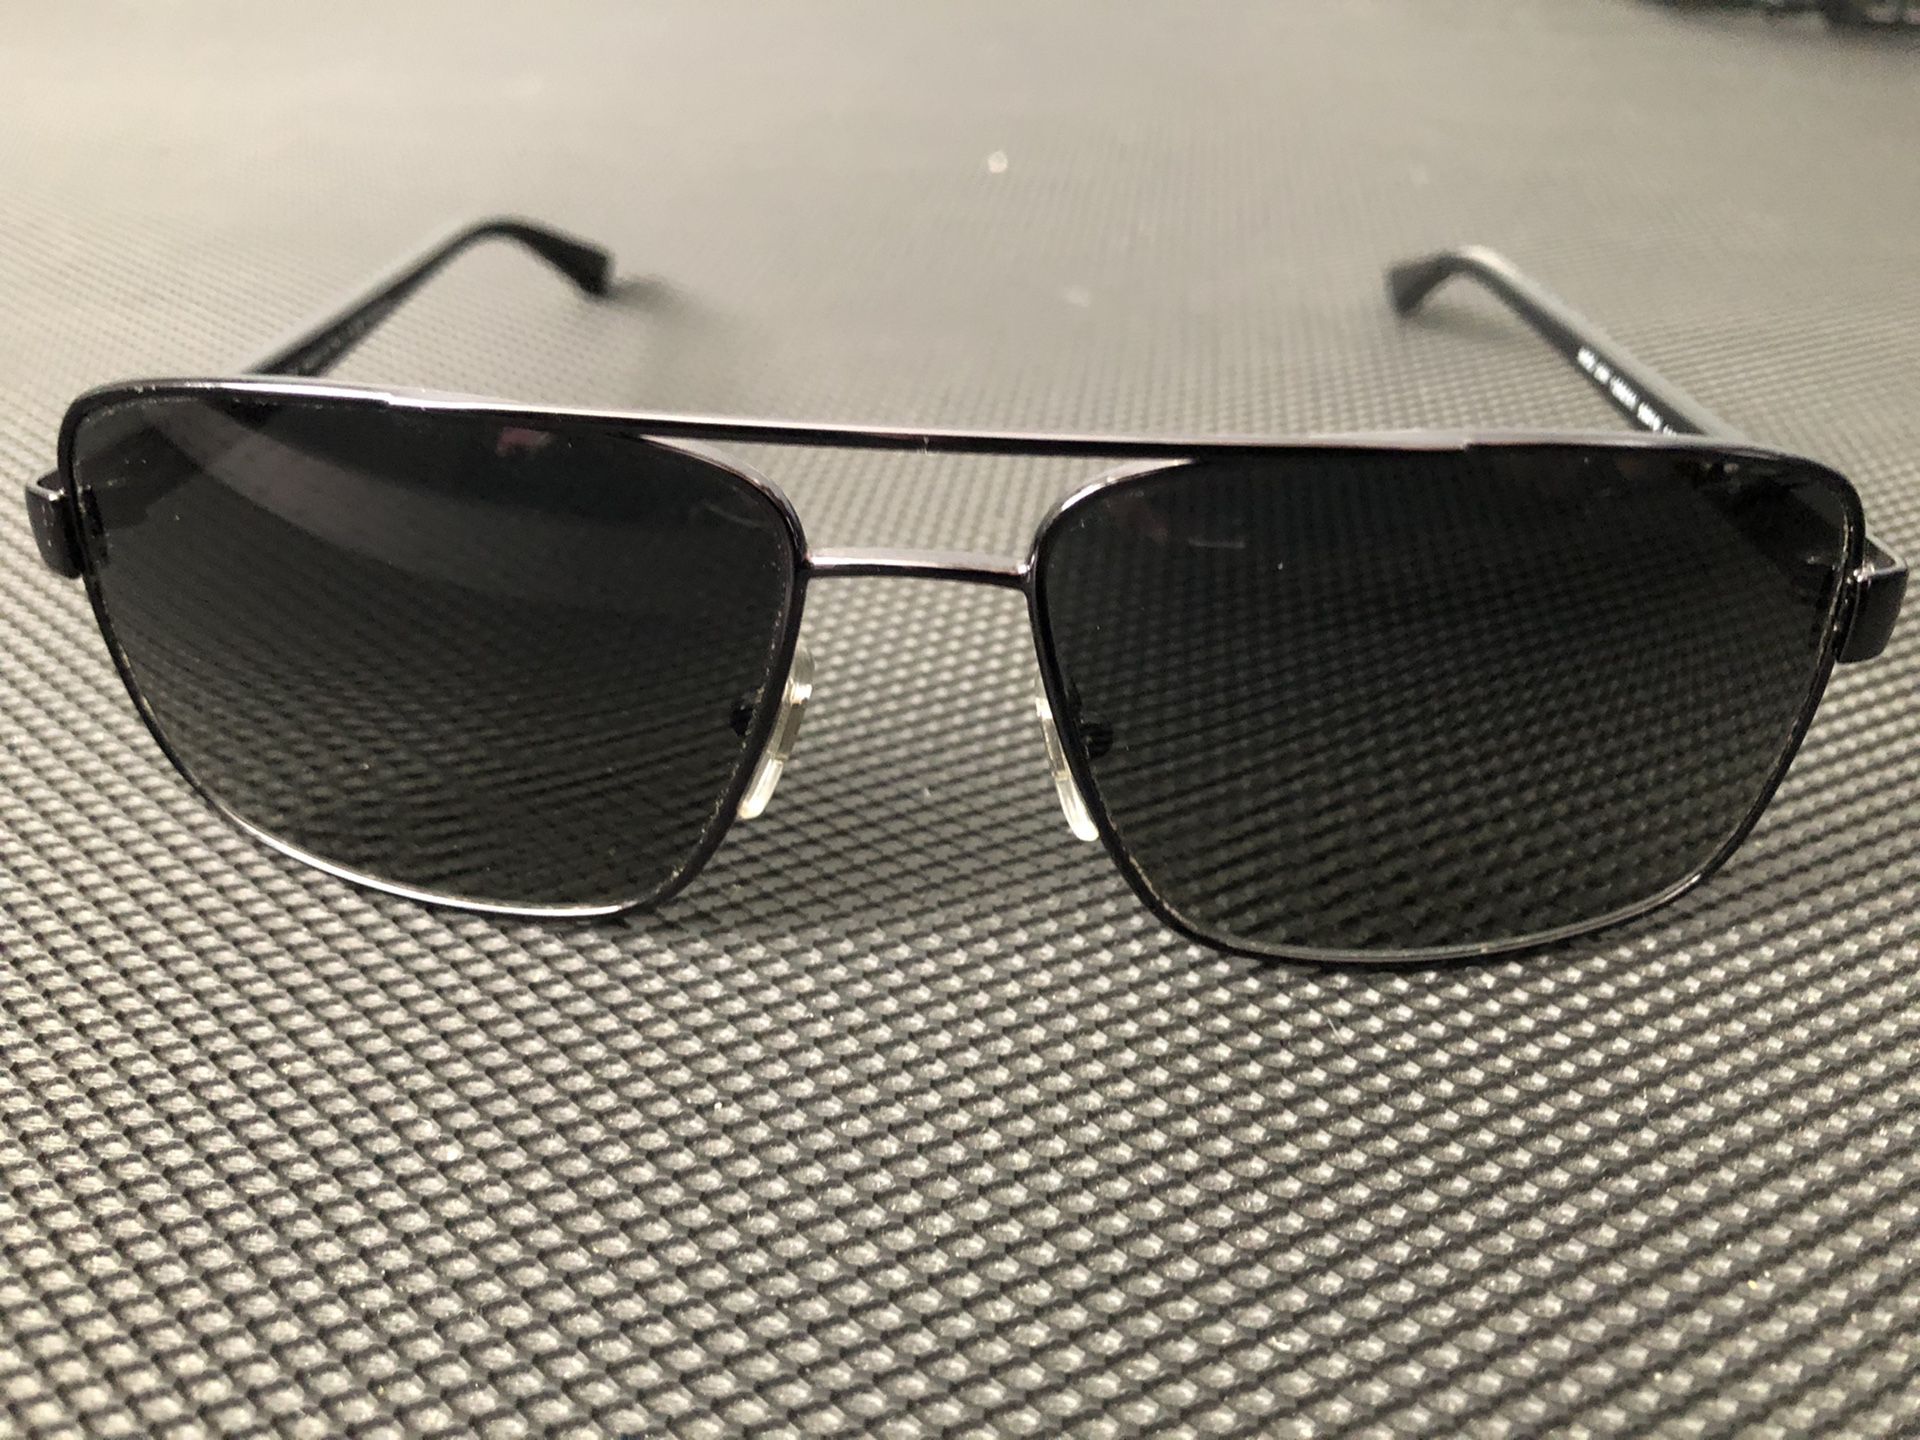 Versace sunglasses model# 2141 in good clean condition made in Italy